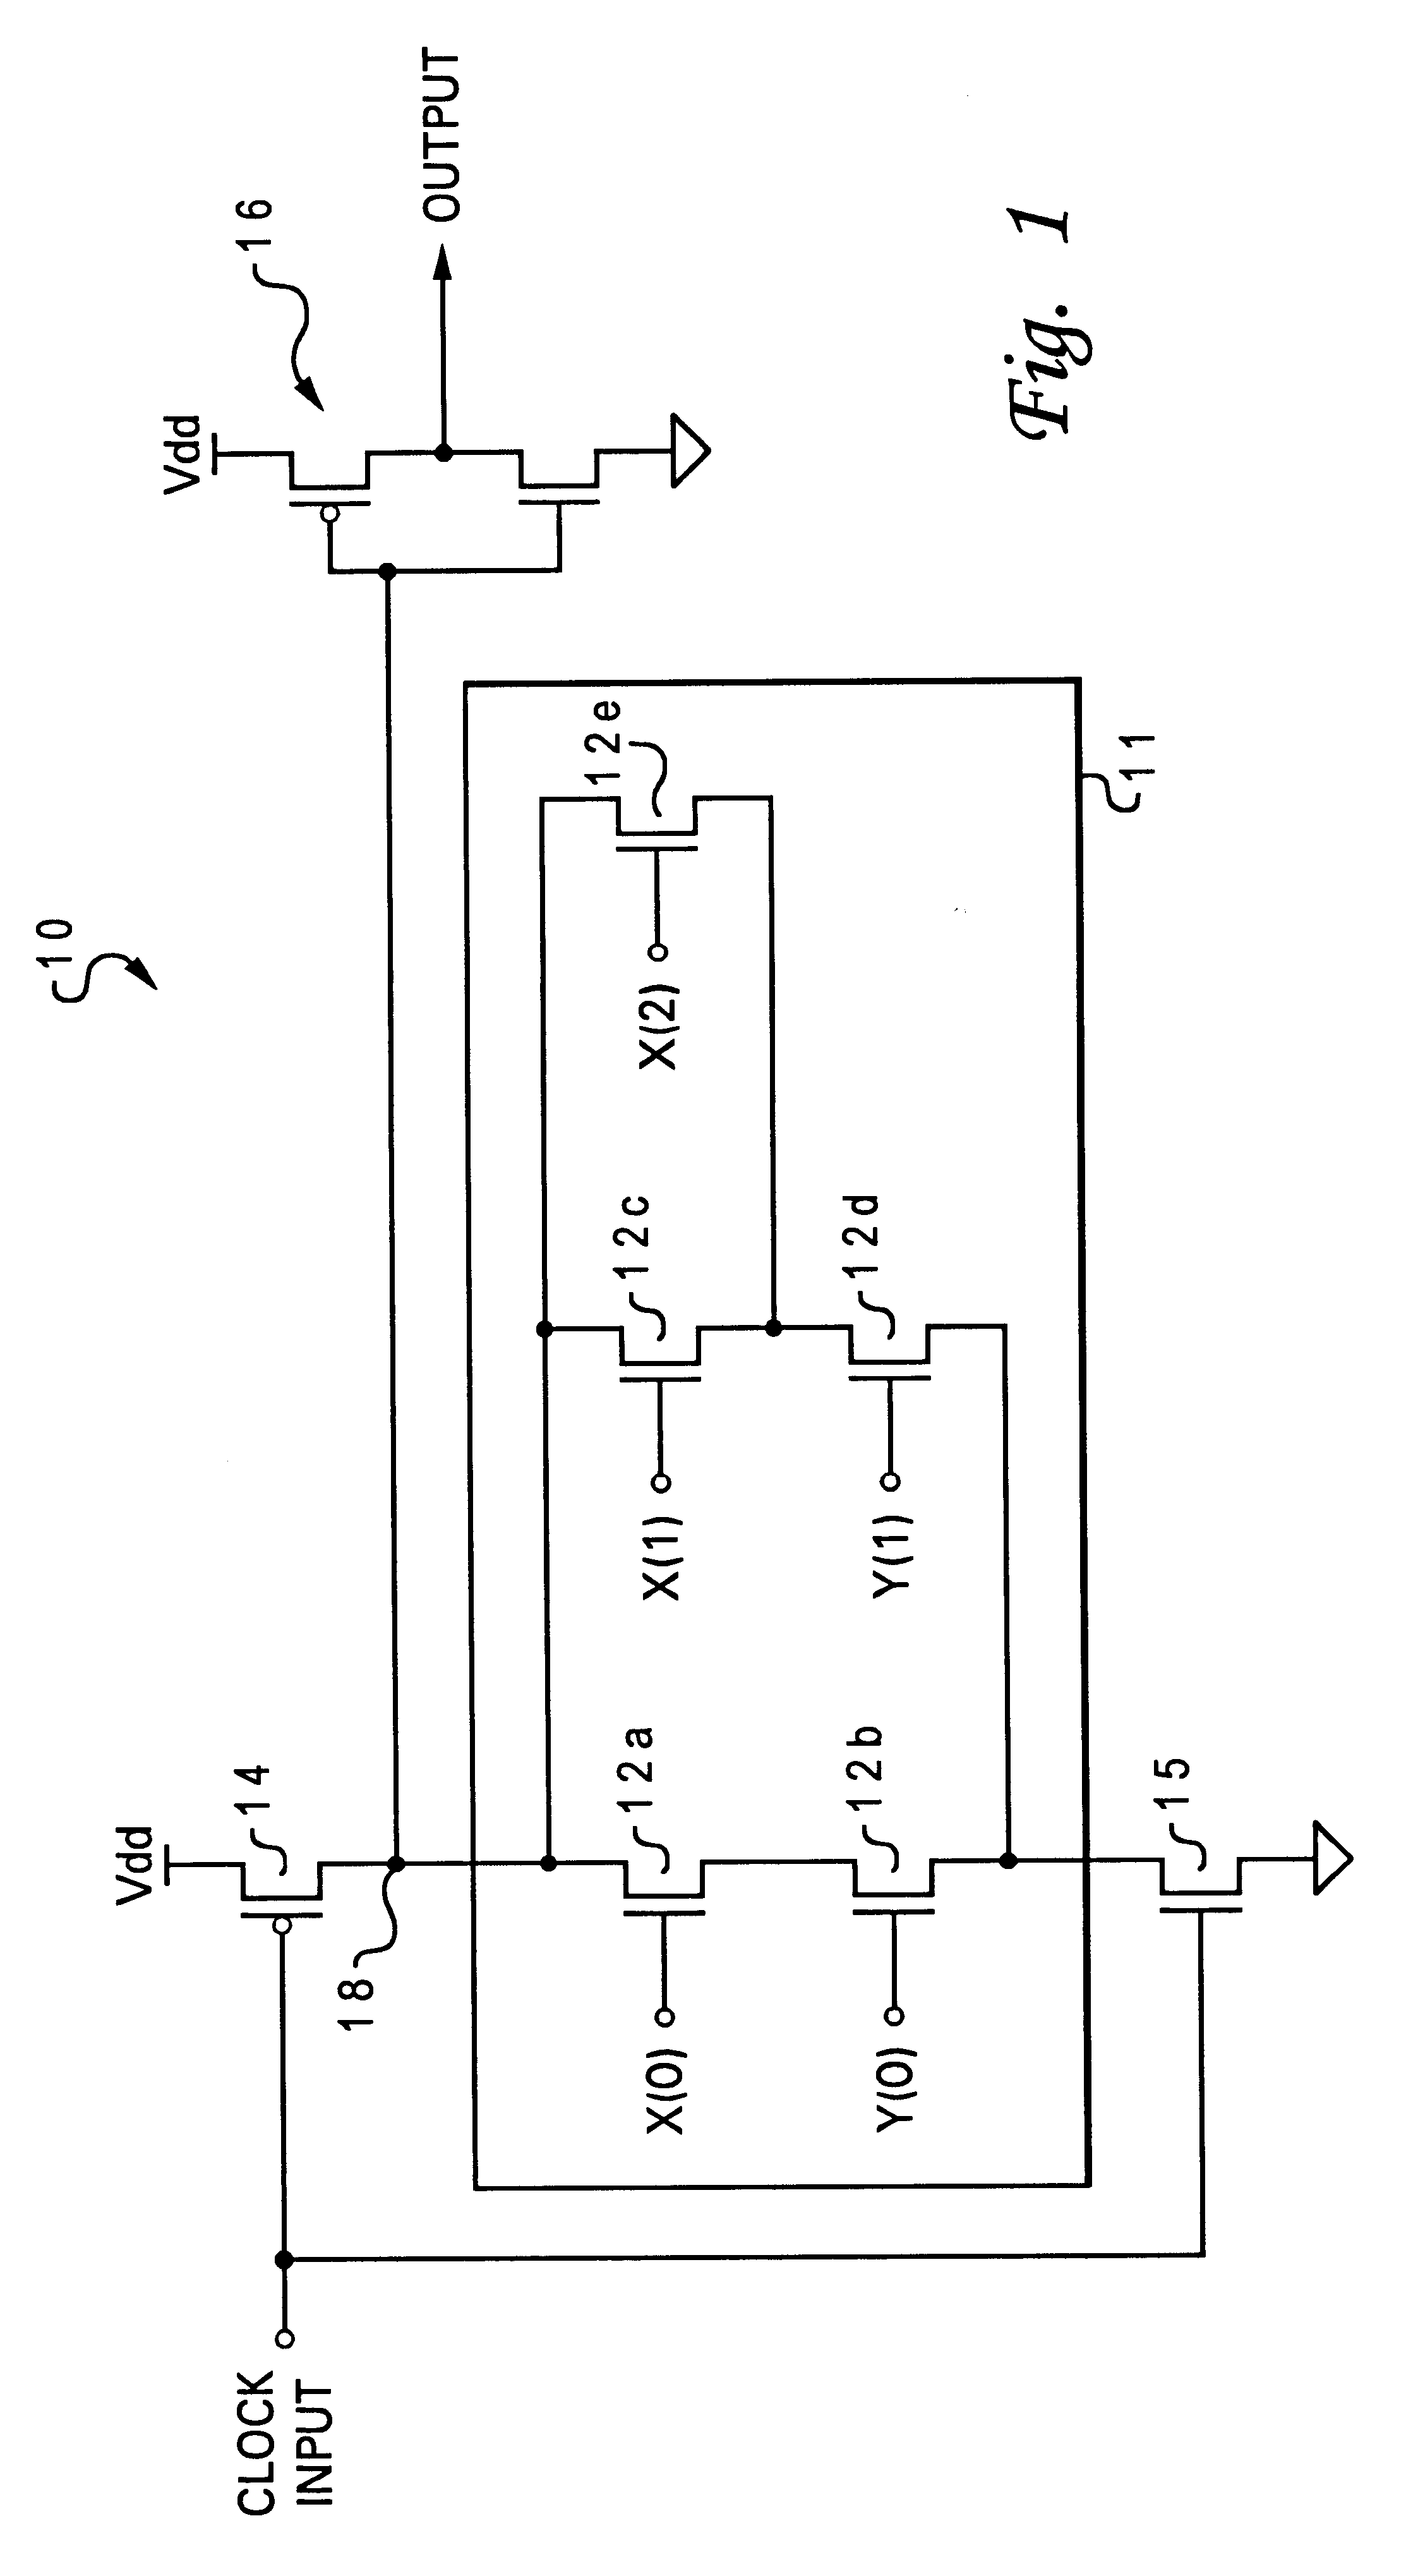 Domino logic circuit having multiplicity of gate dielectric thicknesses